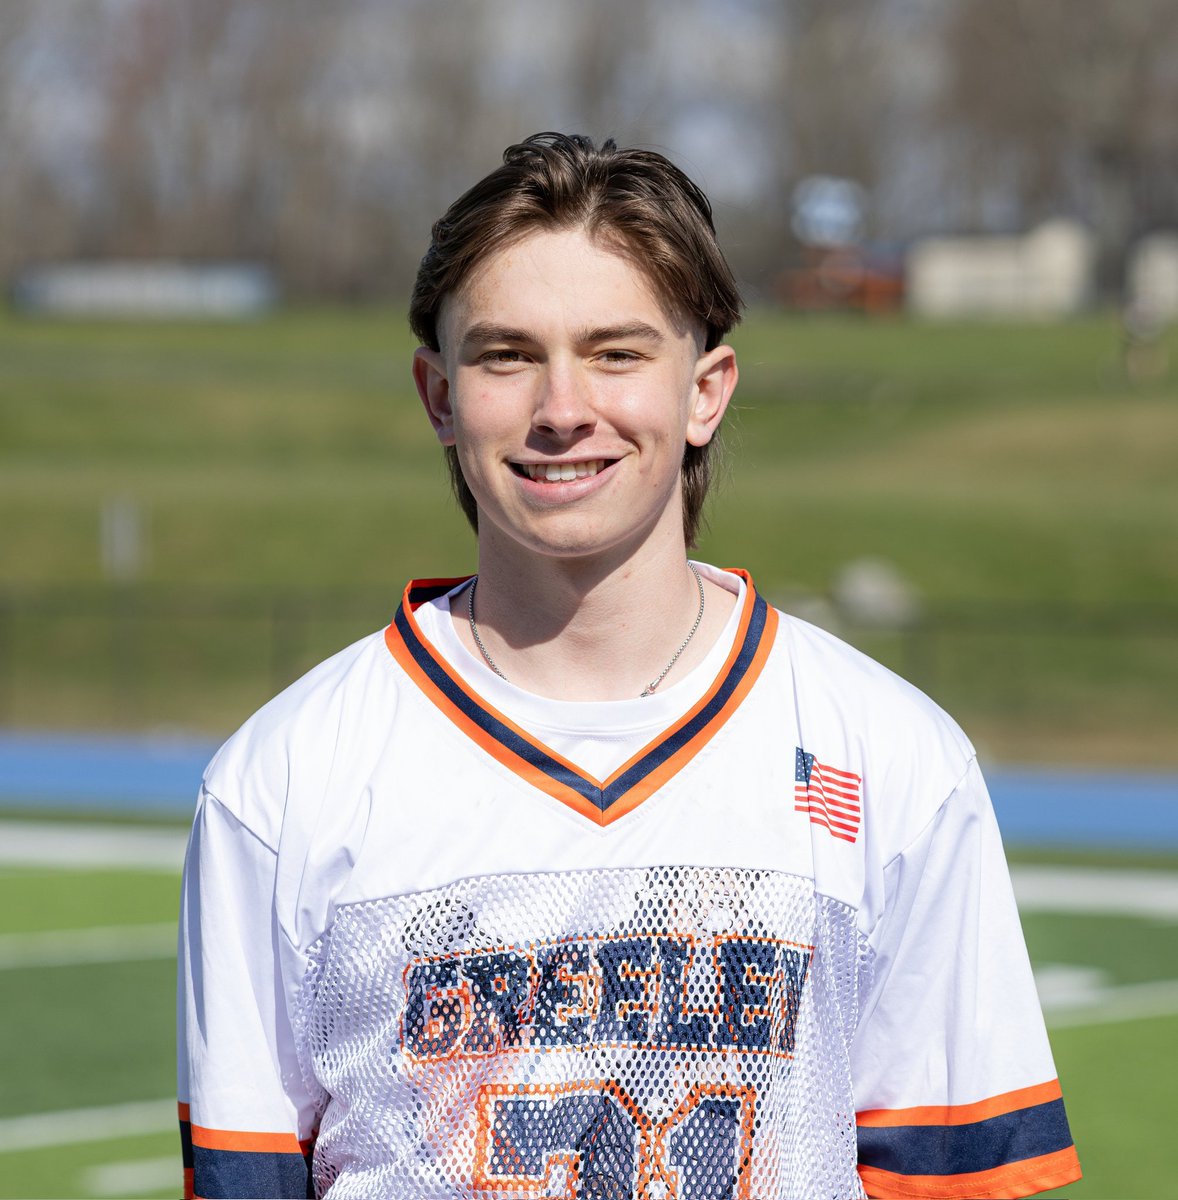 VOTE: Greeley's Matthew Byrne has been nominated for Lacrosse Player of the Week!
'The junior sparked a pair of Quakers wins, delivering two goals and eight assists against Brien McMahon, Conn. and three goals and four assists in a win over Tappan Zee.'
#GoGreeley #WeAreChappaqua